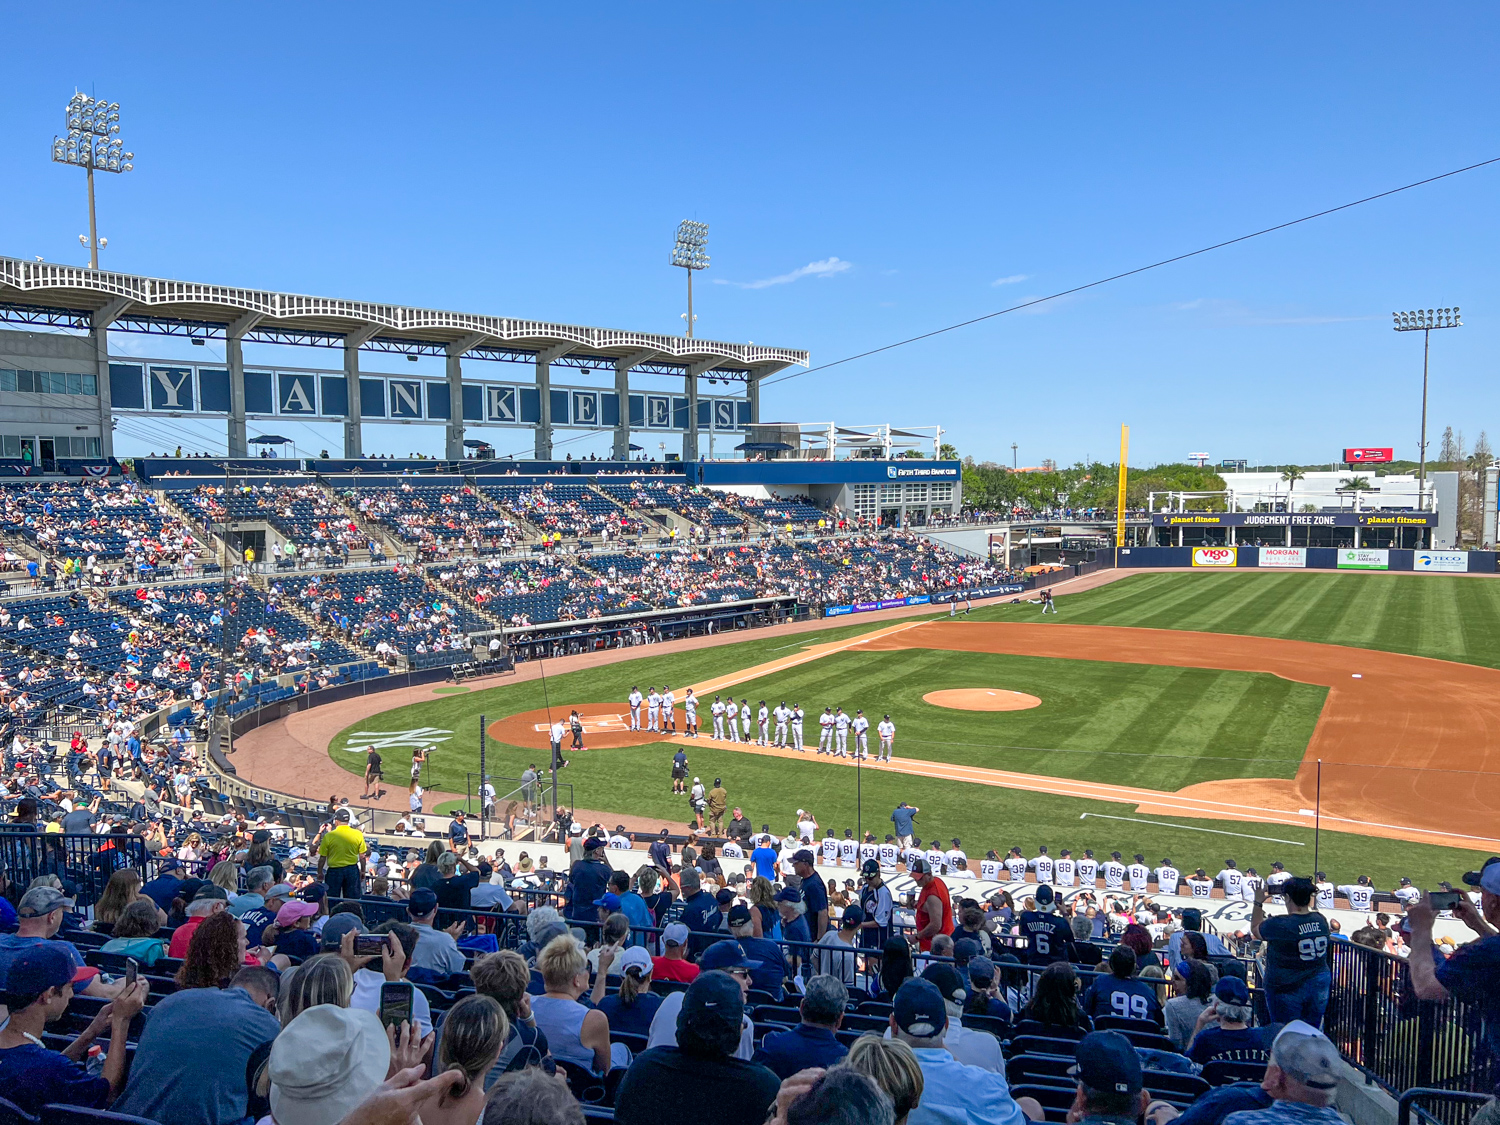 New York Yankees spring training game at George M. Steinbrenner Field in Tampa, Florida